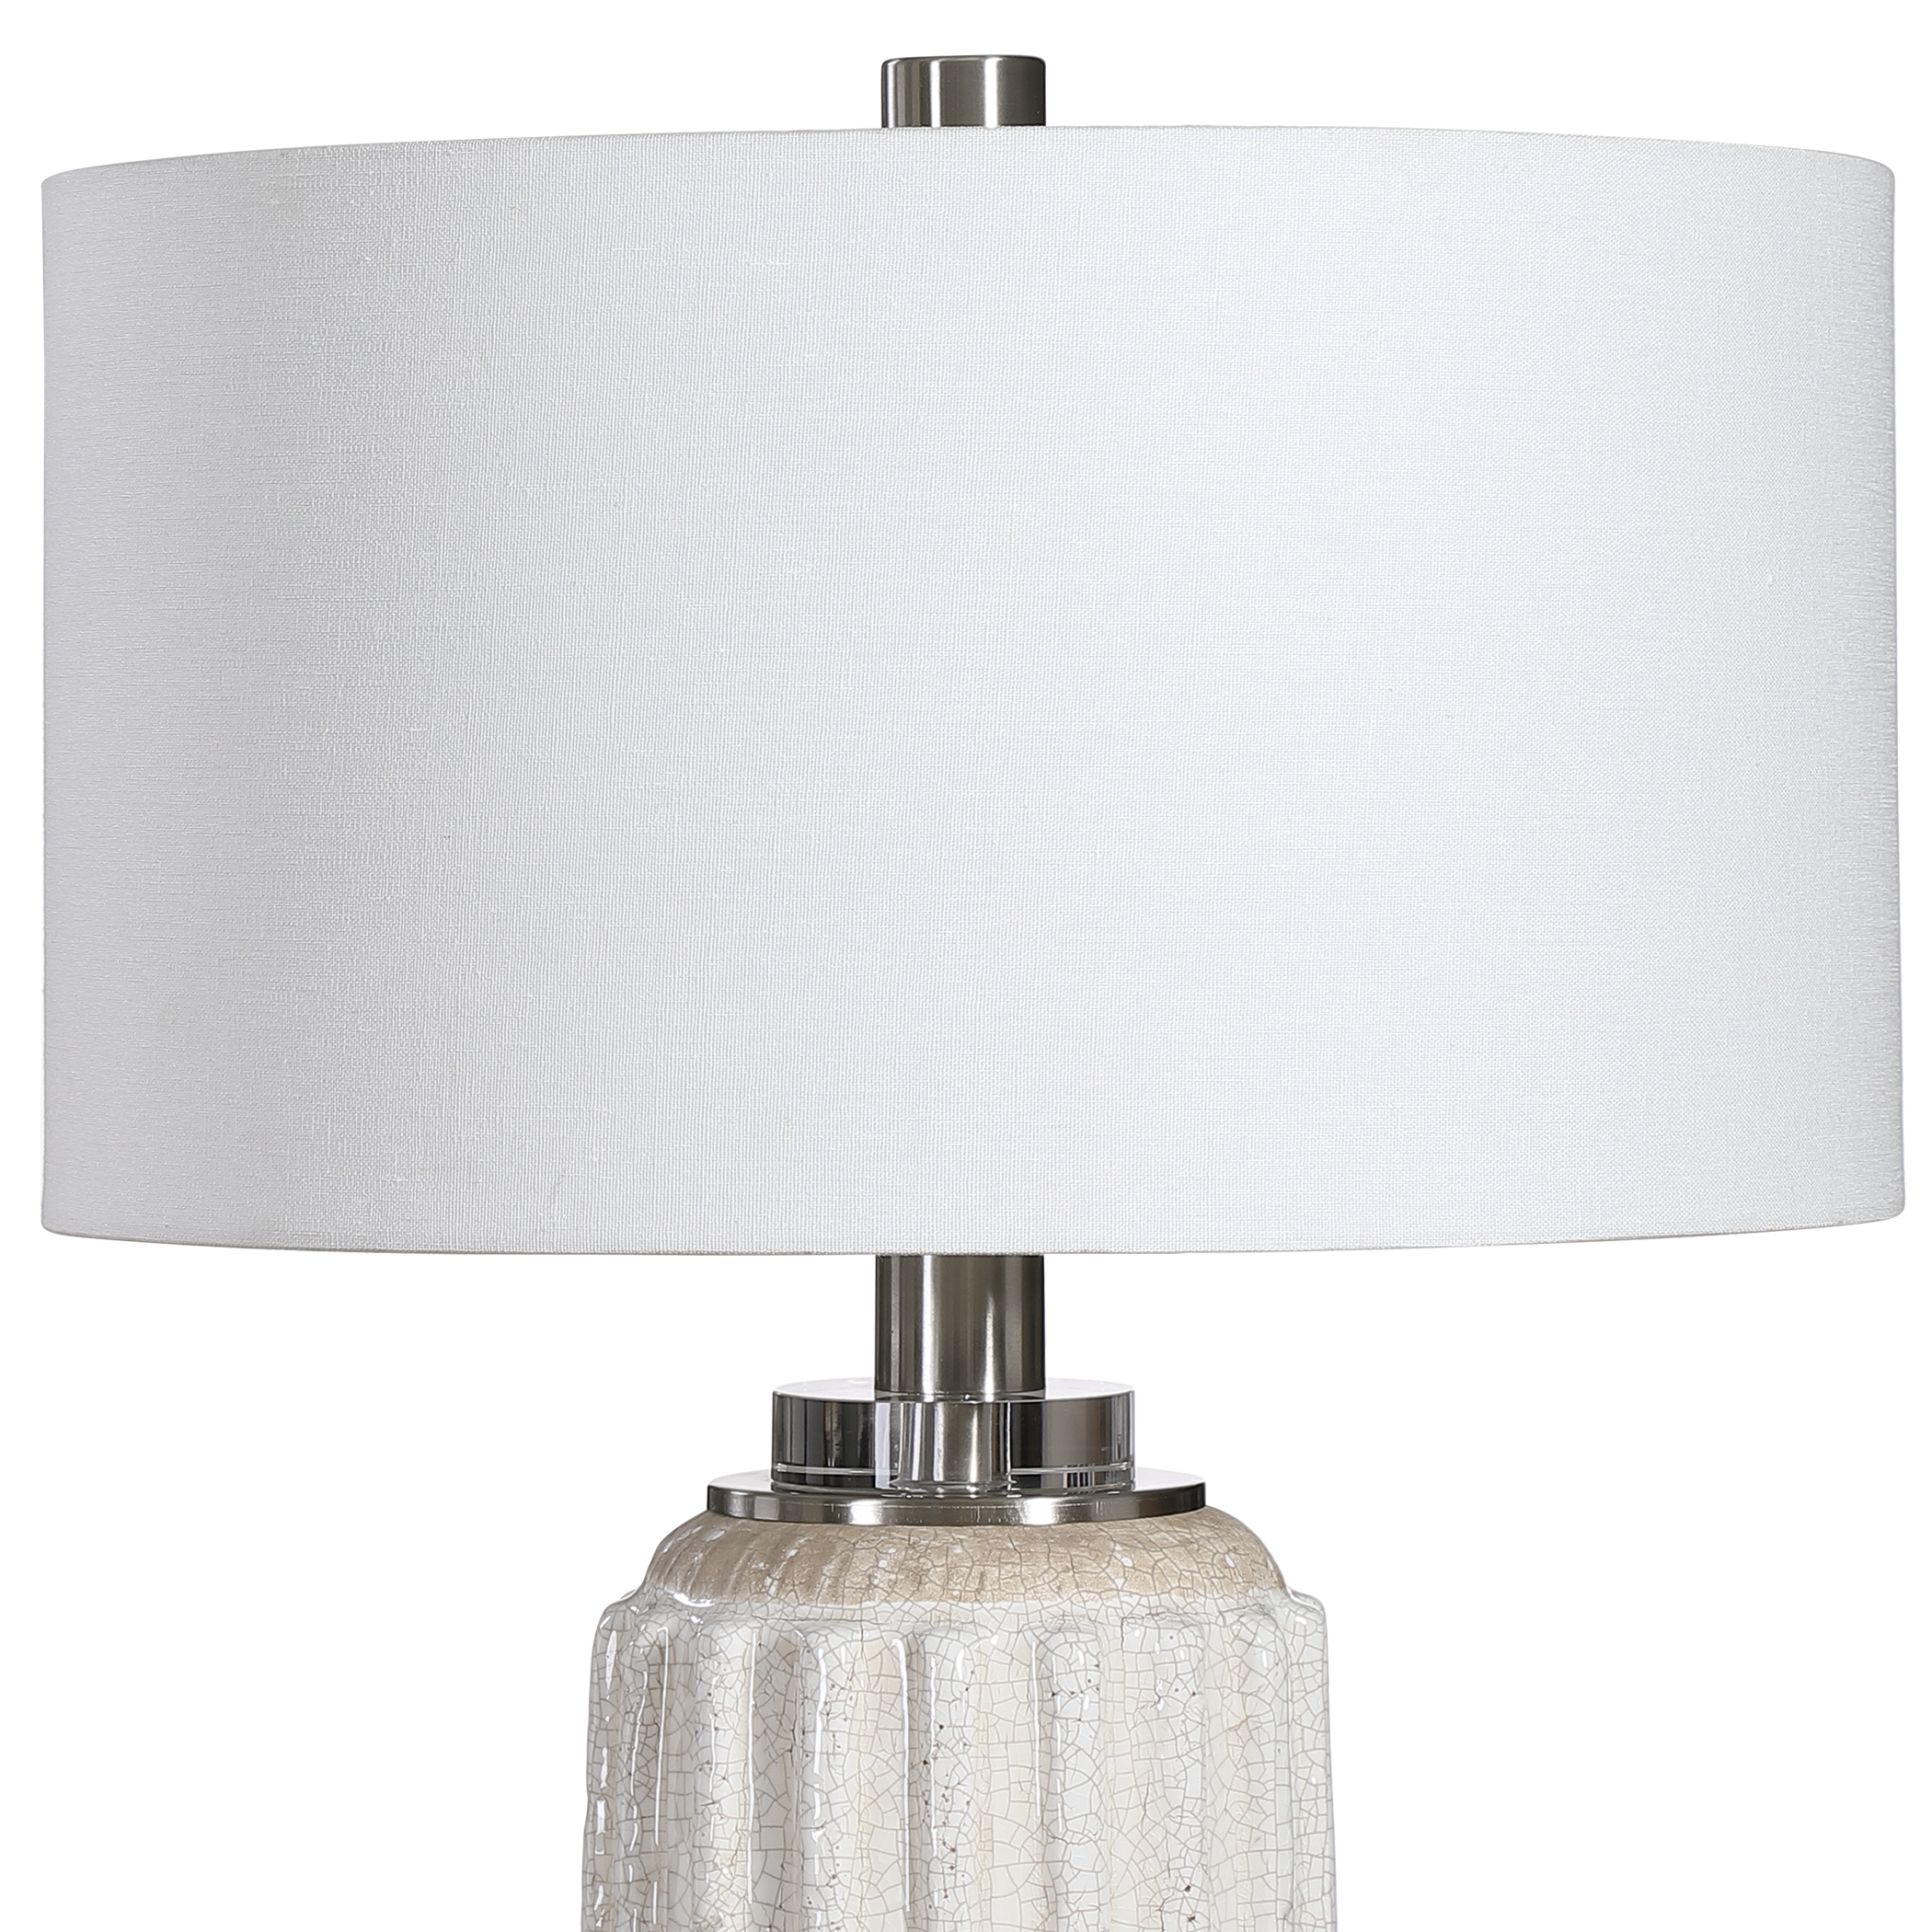 Azariah Crackle Table Lamp, White, 29" - Image 2